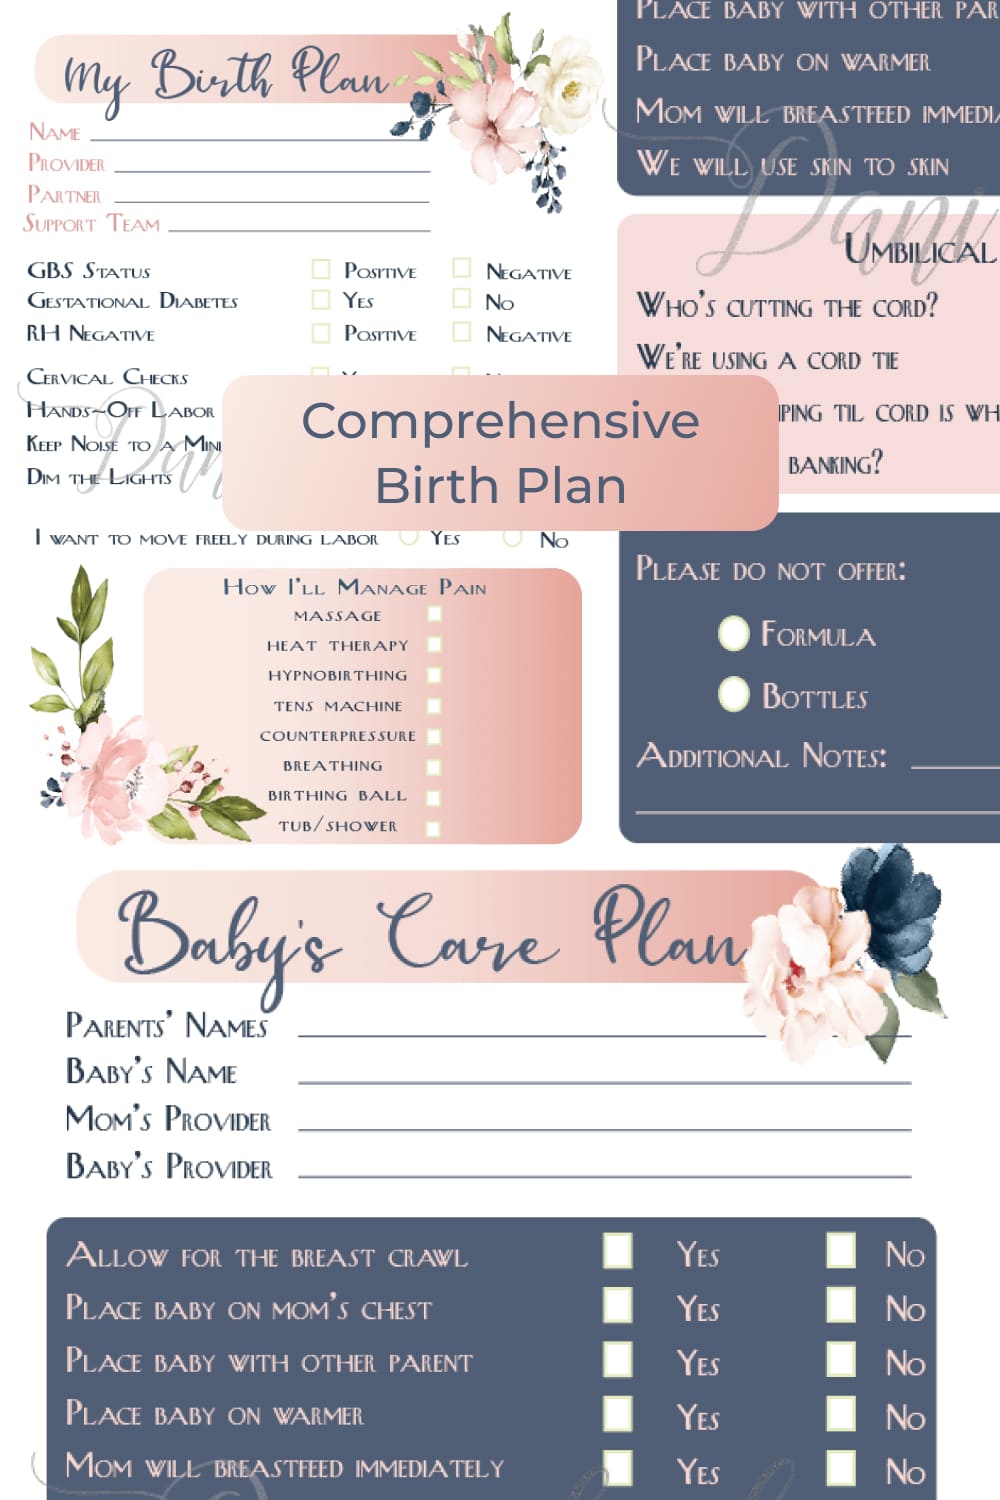 Beautifully designed birth planning sheets that cover every need-to-know aspect of your birth for those who are assisting you, from the moment labor begins through postpartum and newborn care.